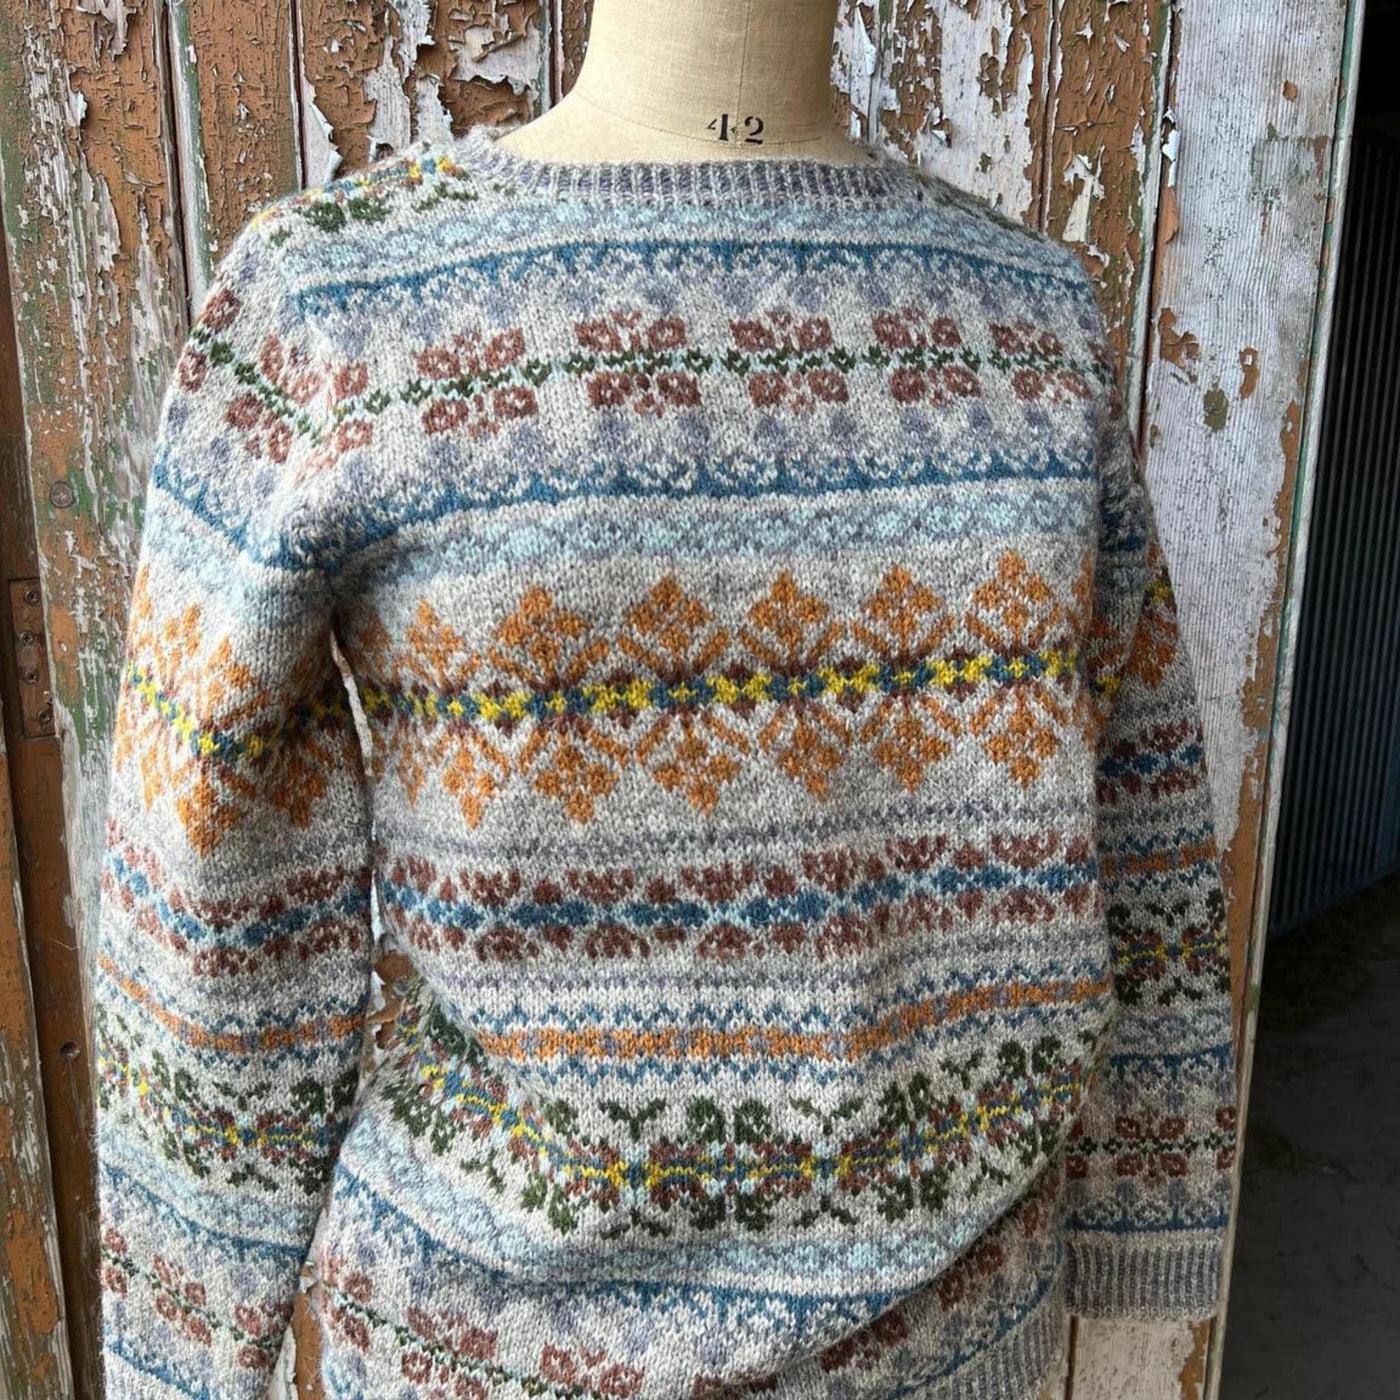 Ravelry: Coats & Clark #275, XL Rated Sweaters - patterns